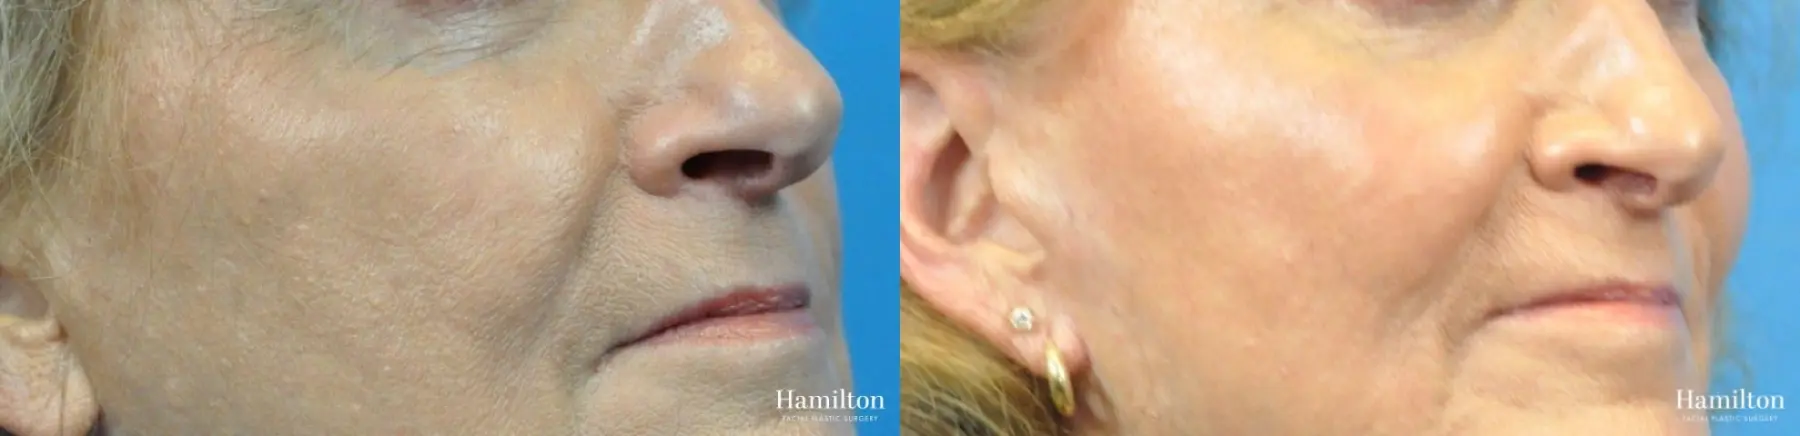 Cheek Augmentation: Patient 1 - Before and After  